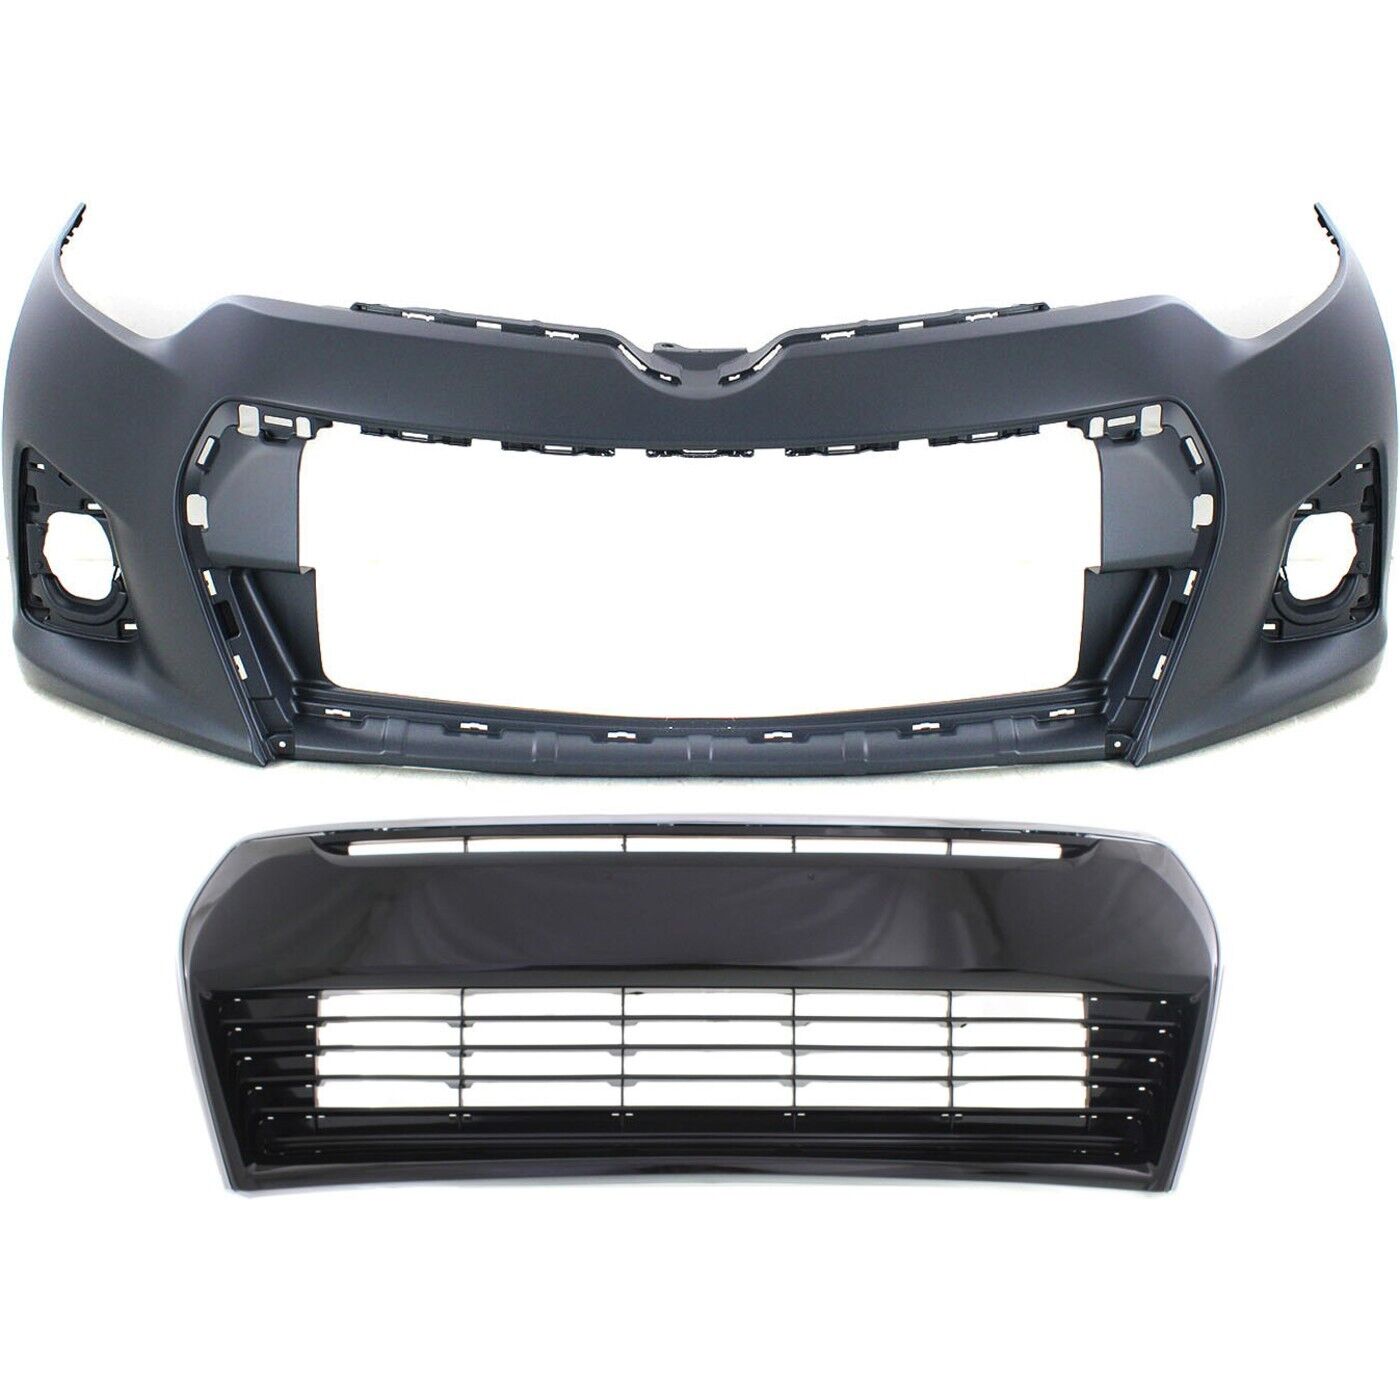 Front Bumper Cover Kit Includes Bumper Grille For 2014-2016 Toyota Corolla